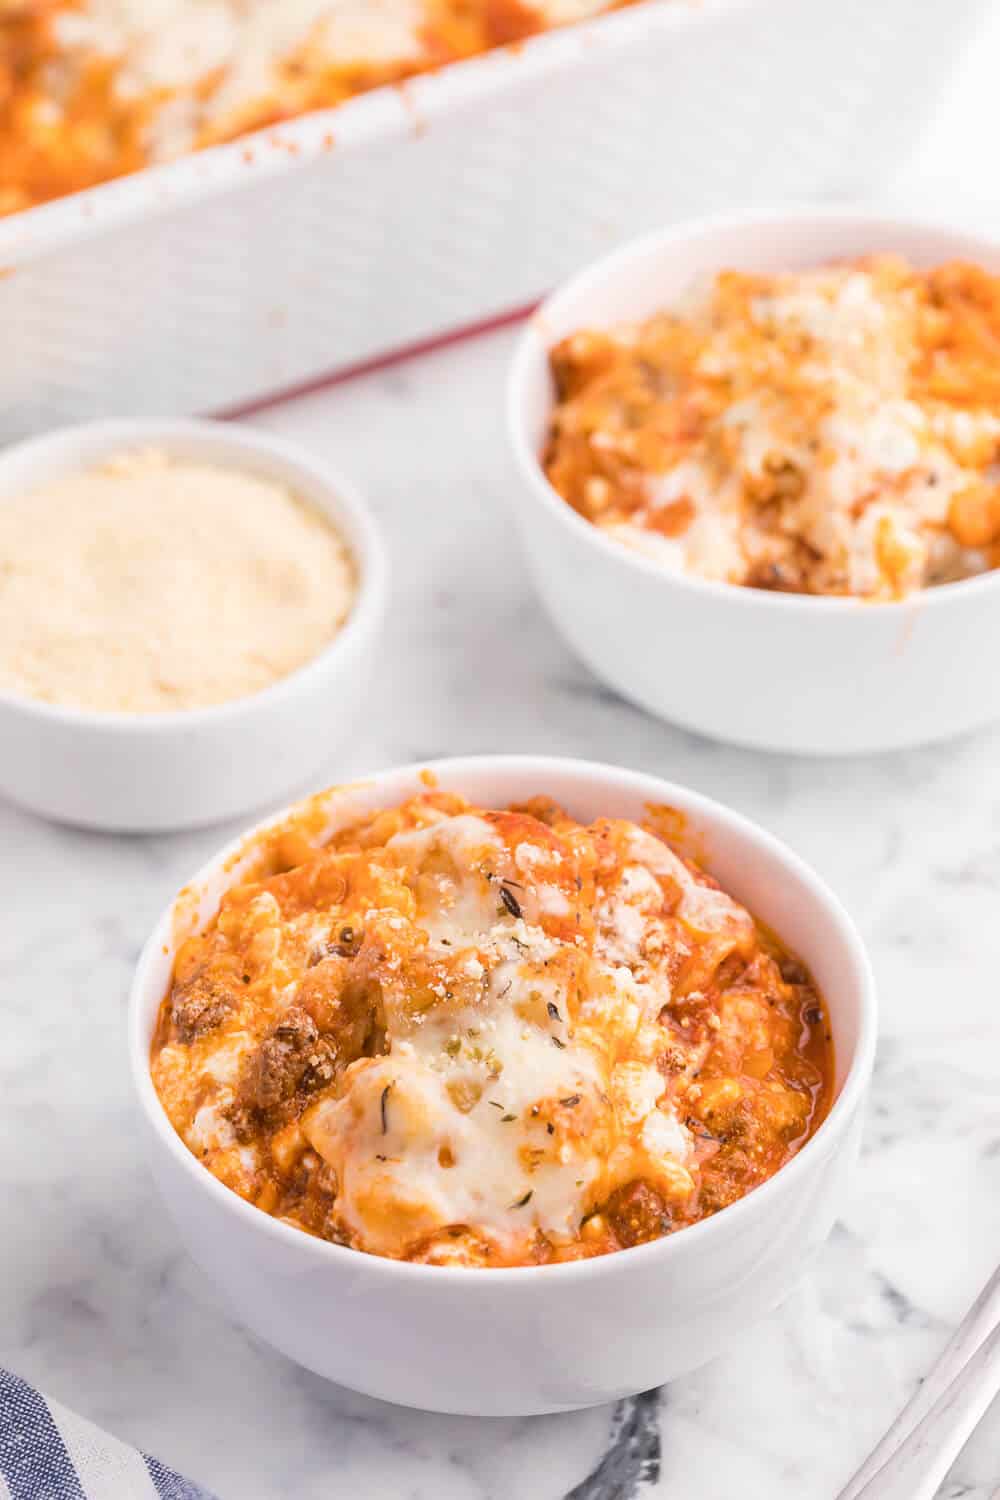 Lasagna Tater Tot Casserole - This kid friendly family dinner recipe uses tater tots to replace the traditional noodles layer - a delicious twist on a family favourite!